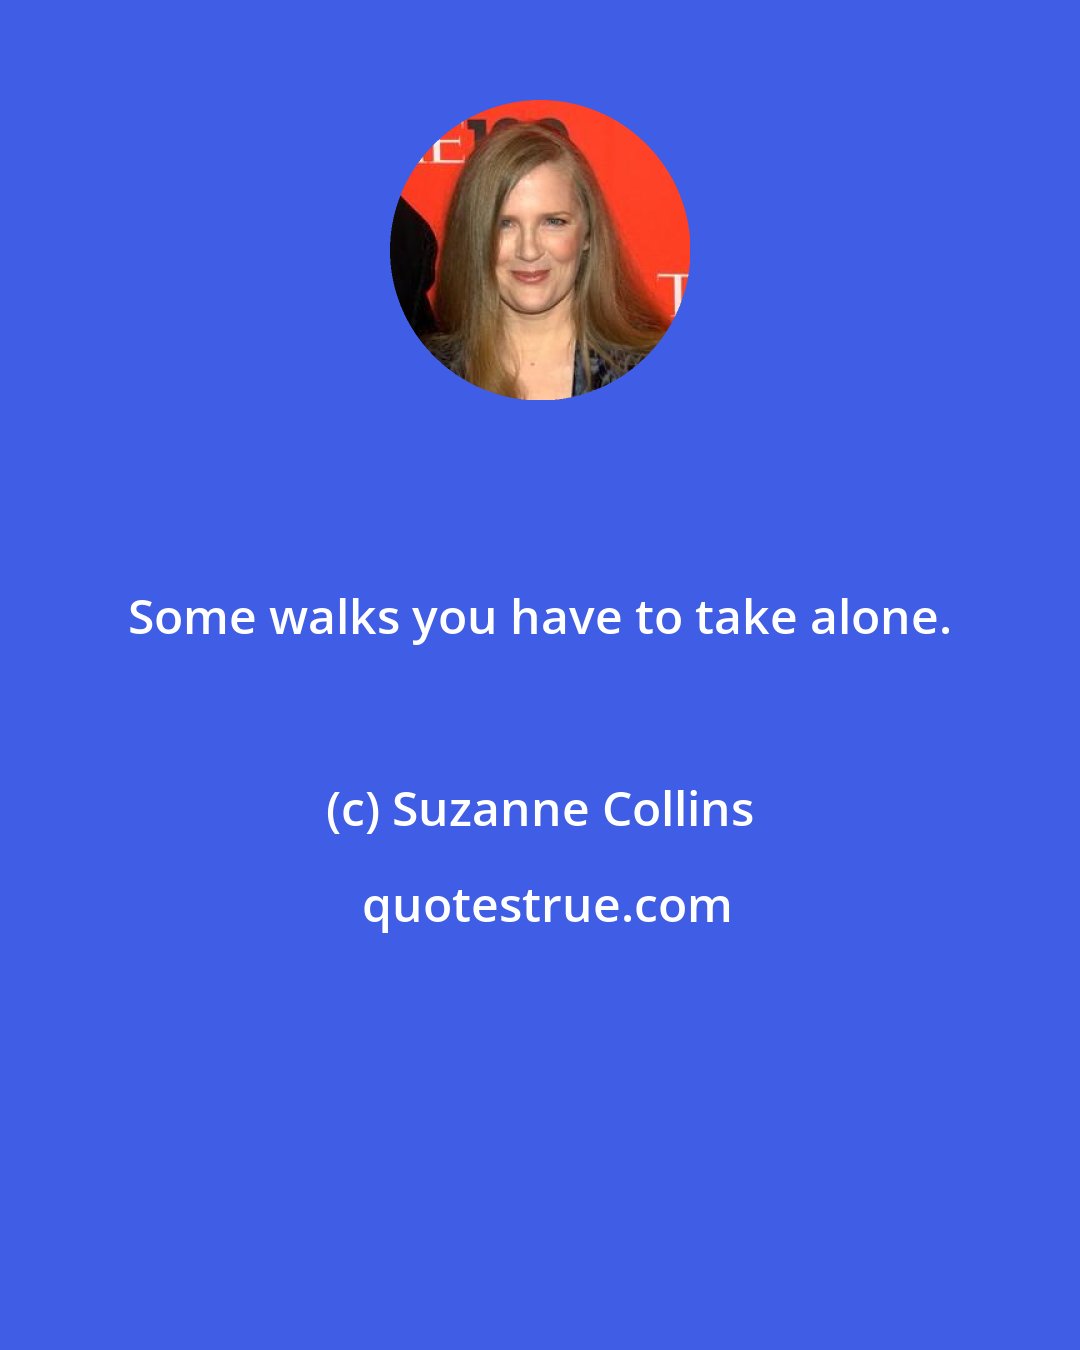 Suzanne Collins: Some walks you have to take alone.